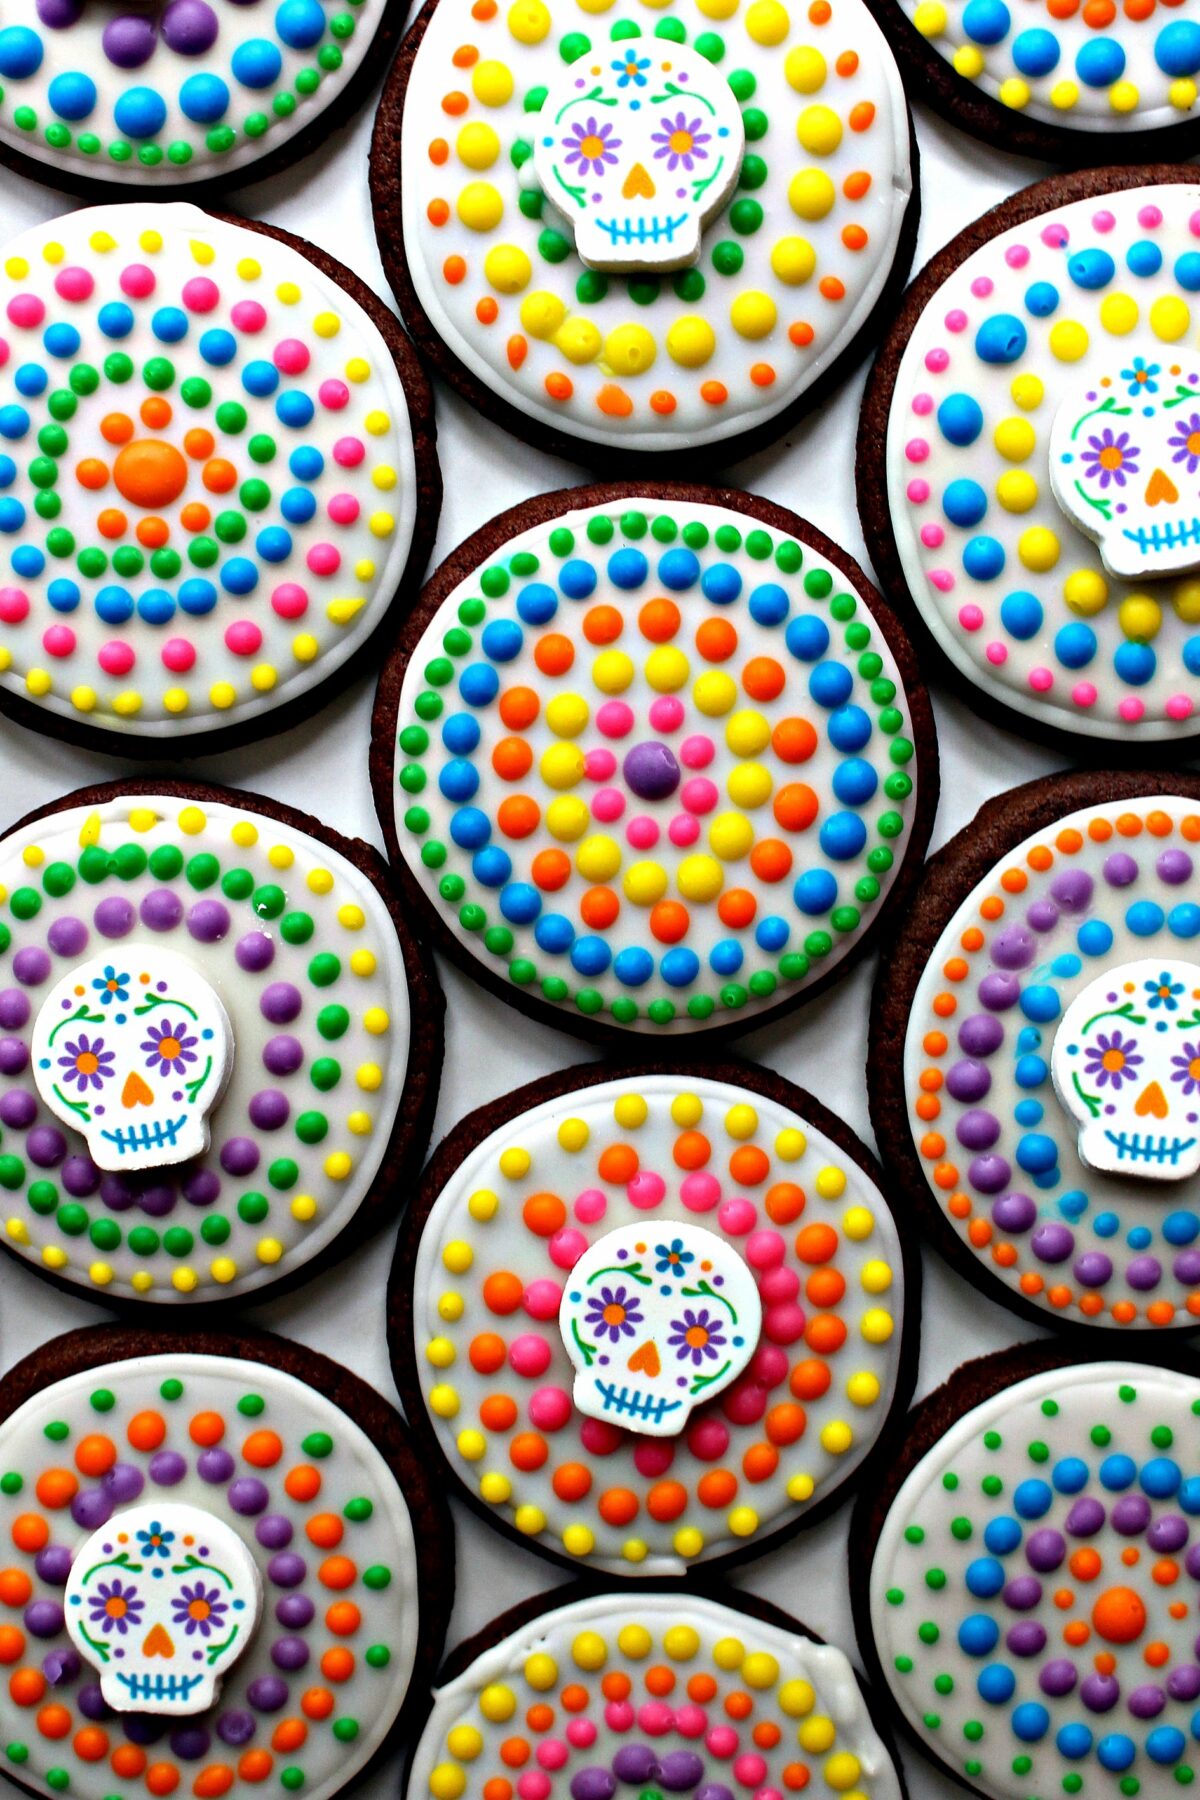 Chocolate sugar cookies decorated with white icing, colorful dot and sugar skulls.